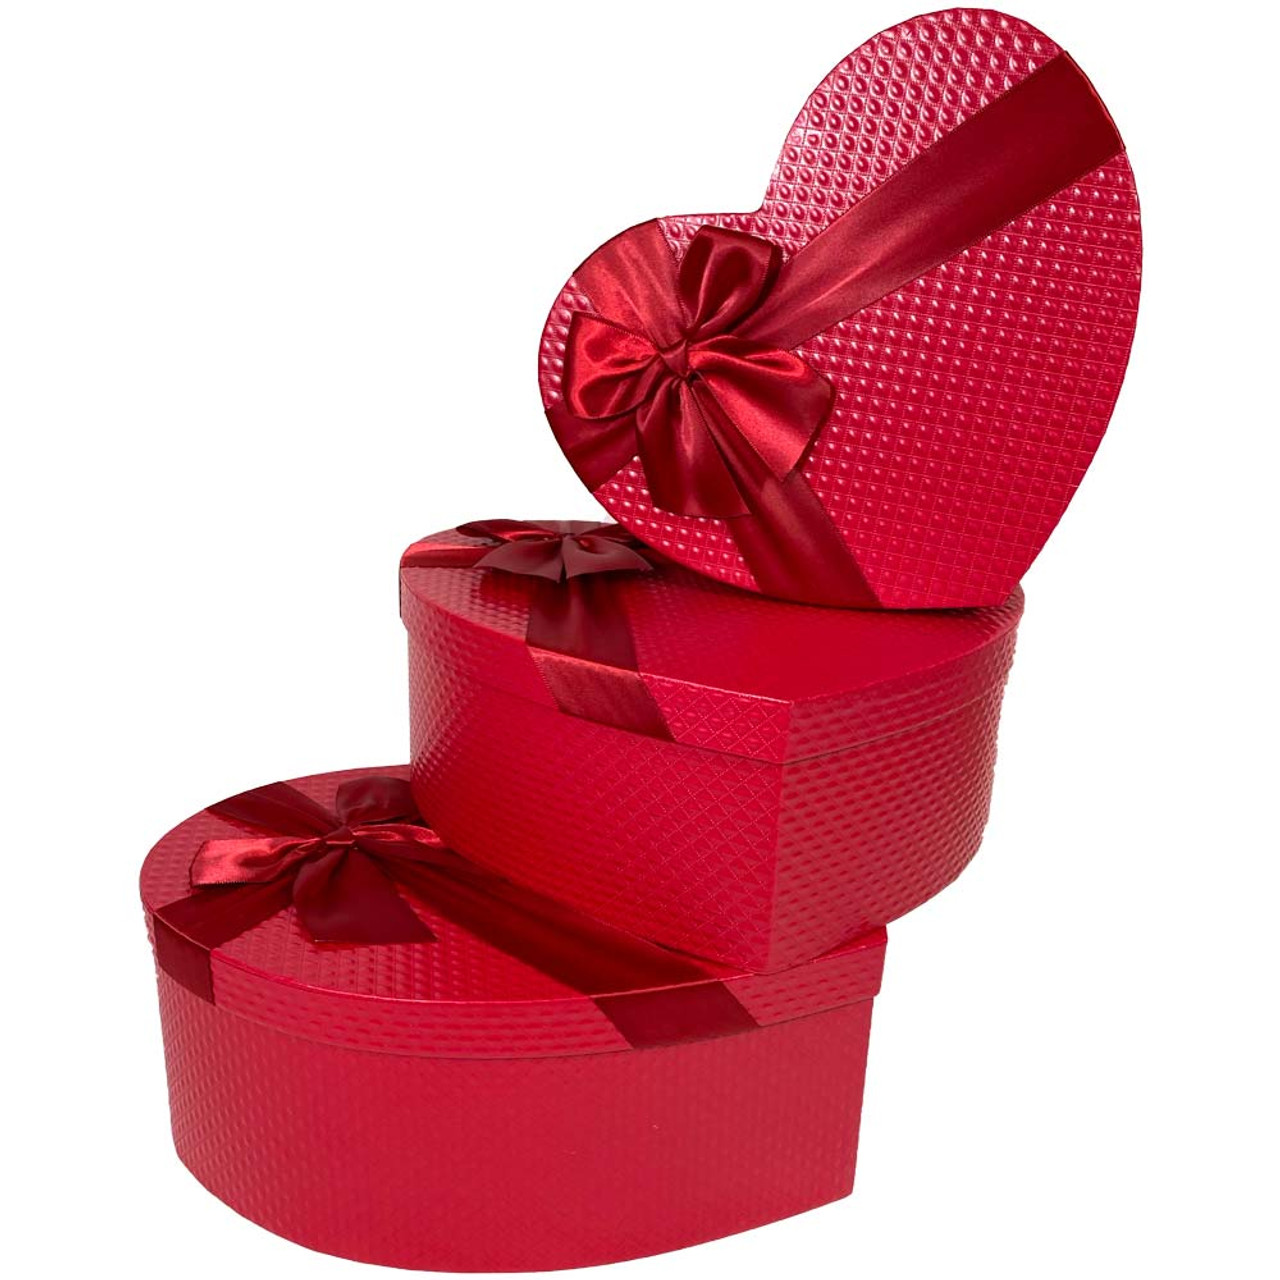 12 Deep Red Floral Heart Gift Box with Ribbon - Set of 3